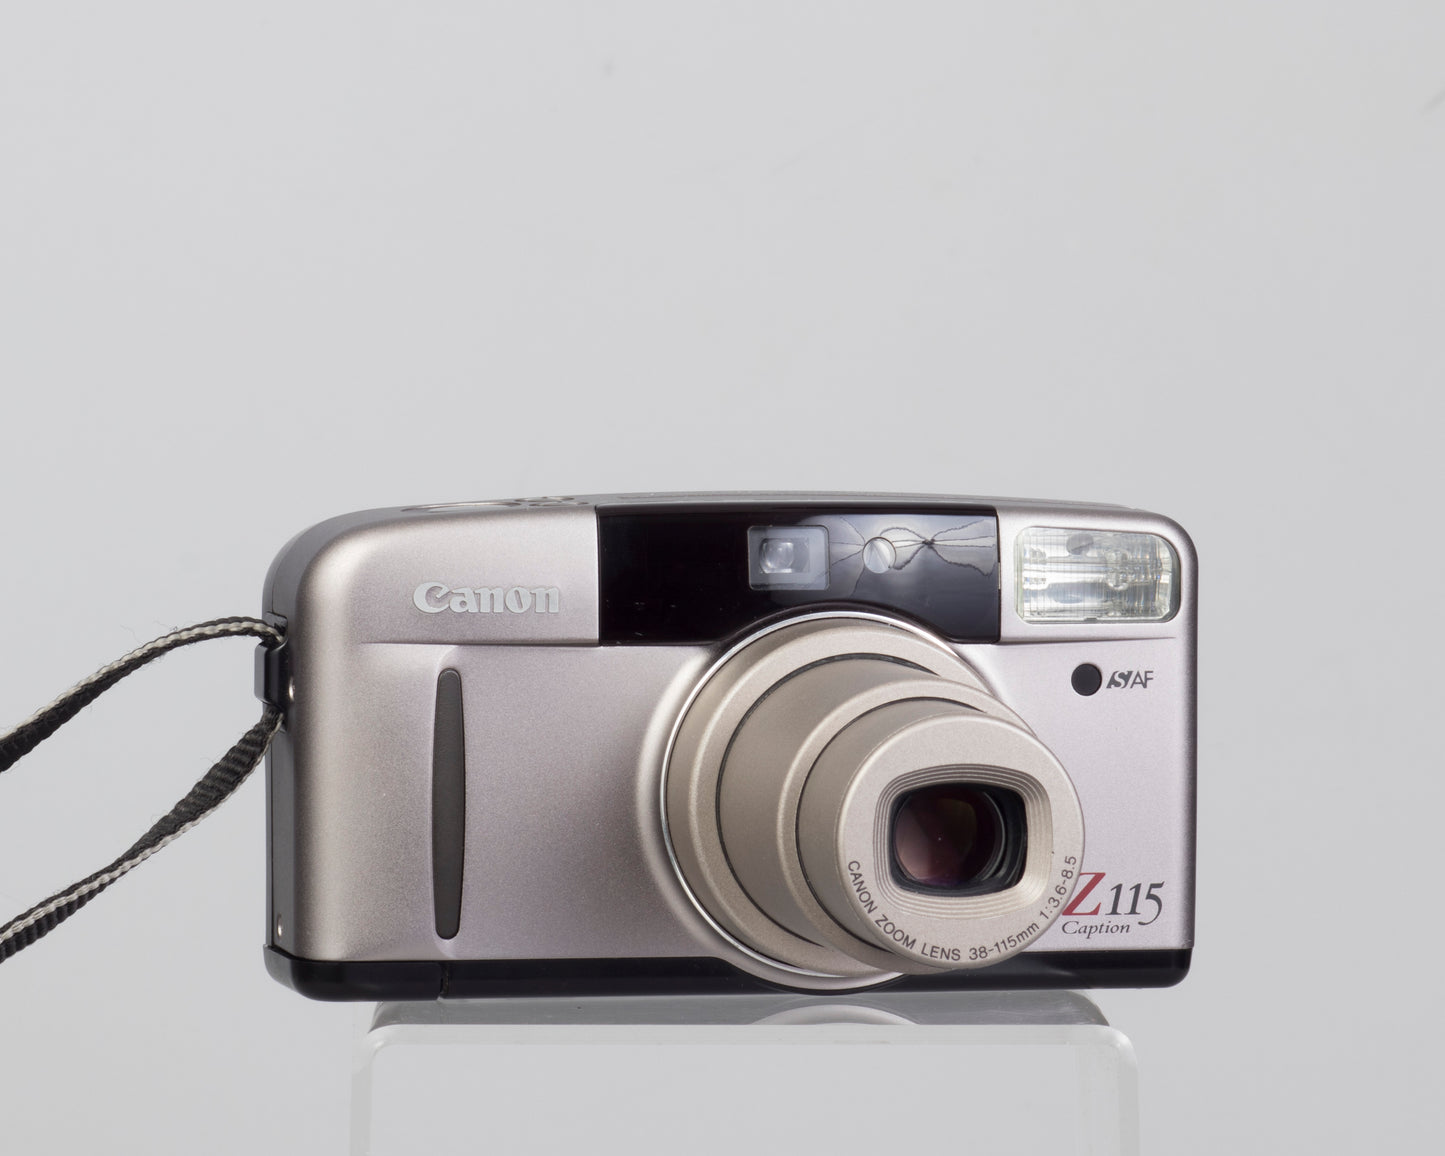 The Canon Sure Z115 was the company's top of the line 35mm point-and-shoot camera from the 1990s (shown zoomed out)